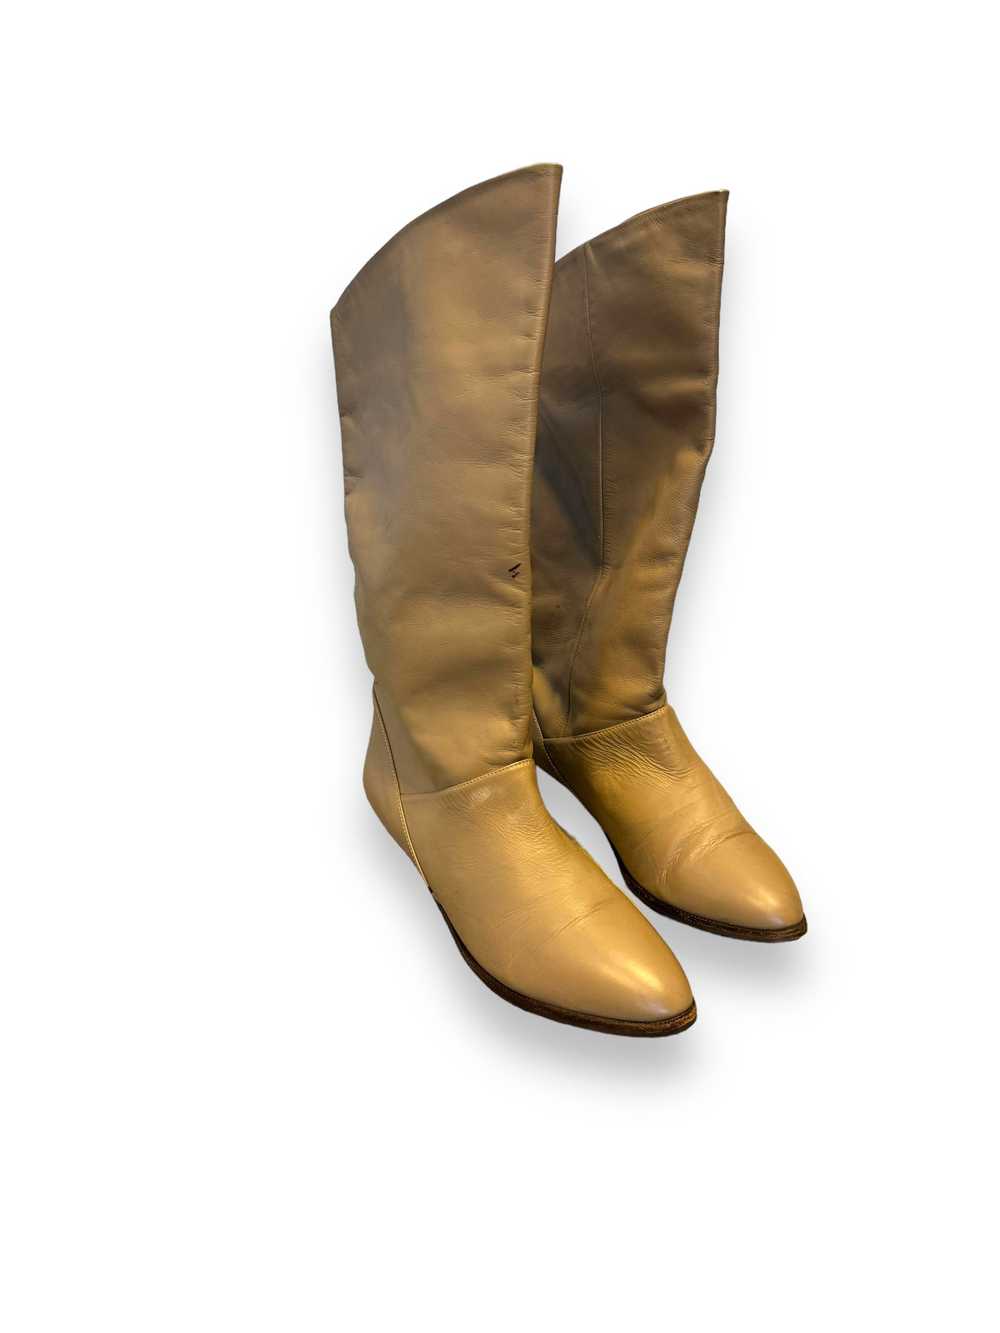 1980s Flat Beige Leather Boots - image 3